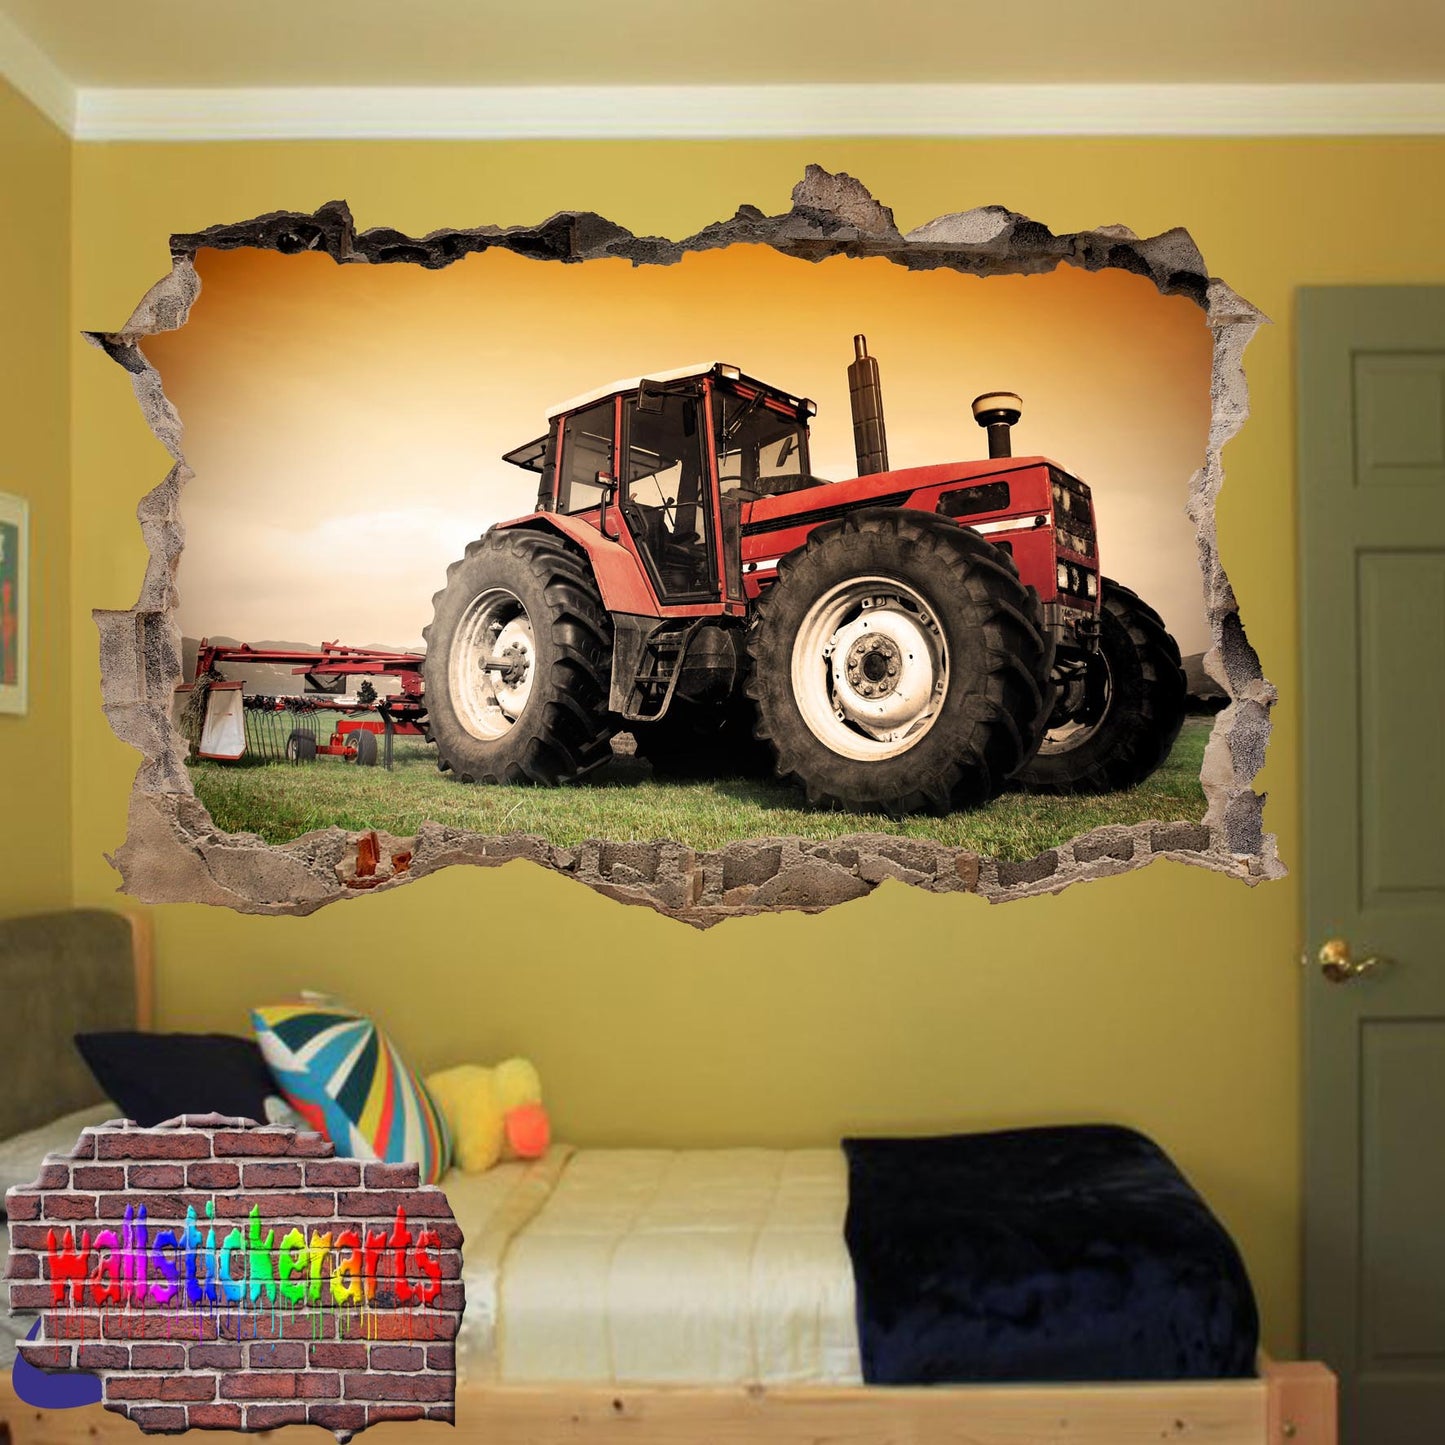 VINTAGE TRACTOR WALL STICKER POSTER